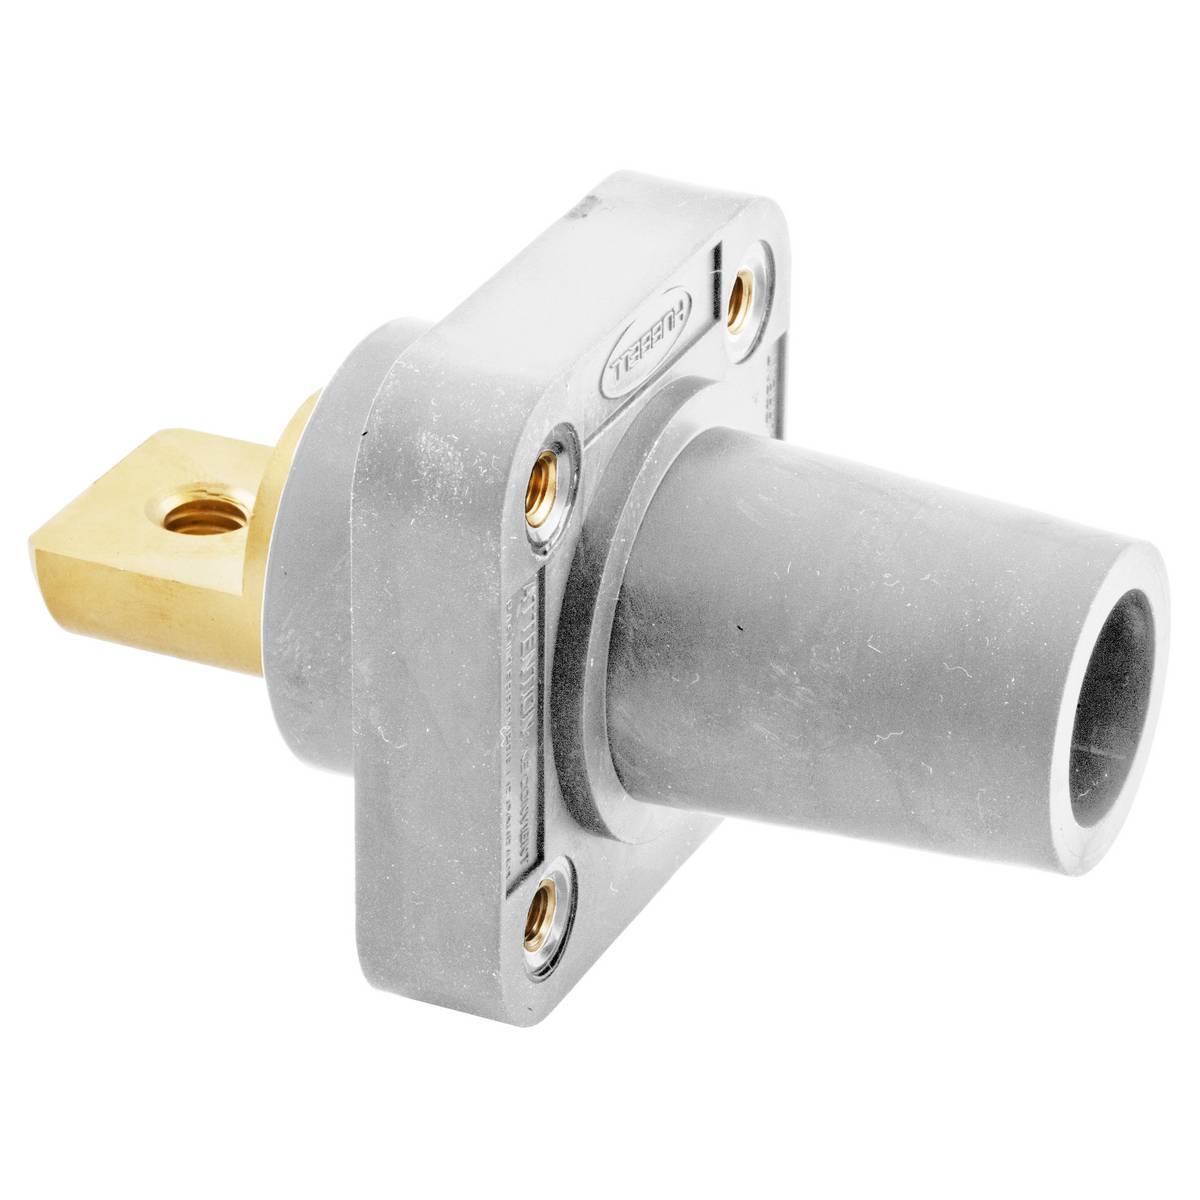 Bryant Electric Wiring Device-Kellems HBLFRBW 16 Series Cam Type Heavy Duty Industrial Grade Single Pole Receptacle, 600/250 VAC/VDC, 300/400 A, 4 to 4/0 AWG Wire, Female/Busbar Connection, NEMA 3R/4X/12 NEMA Rating